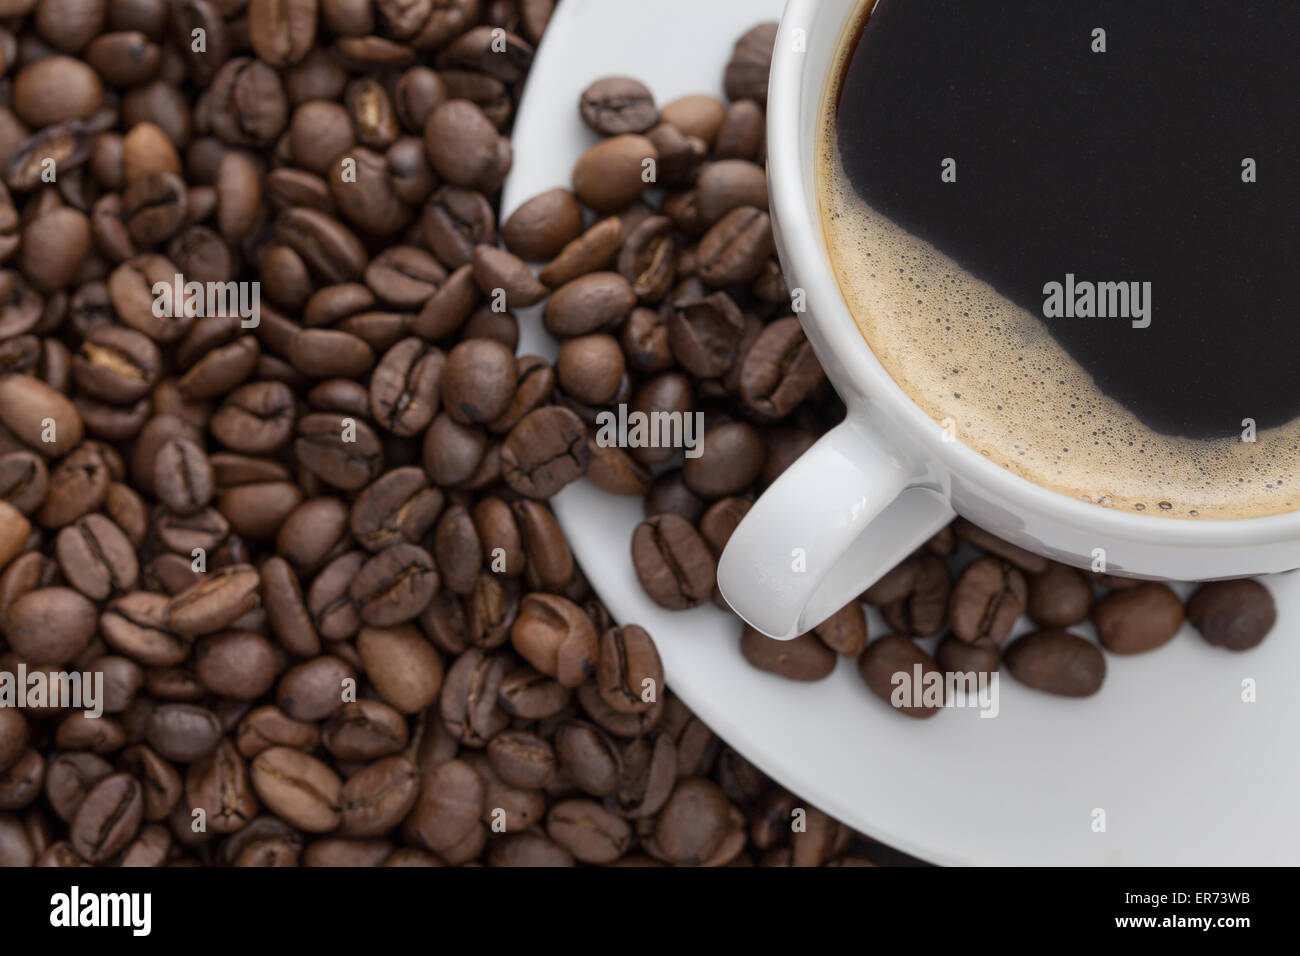 White coffee cup with coffee and around the cup lies coffee beans Stock Photo